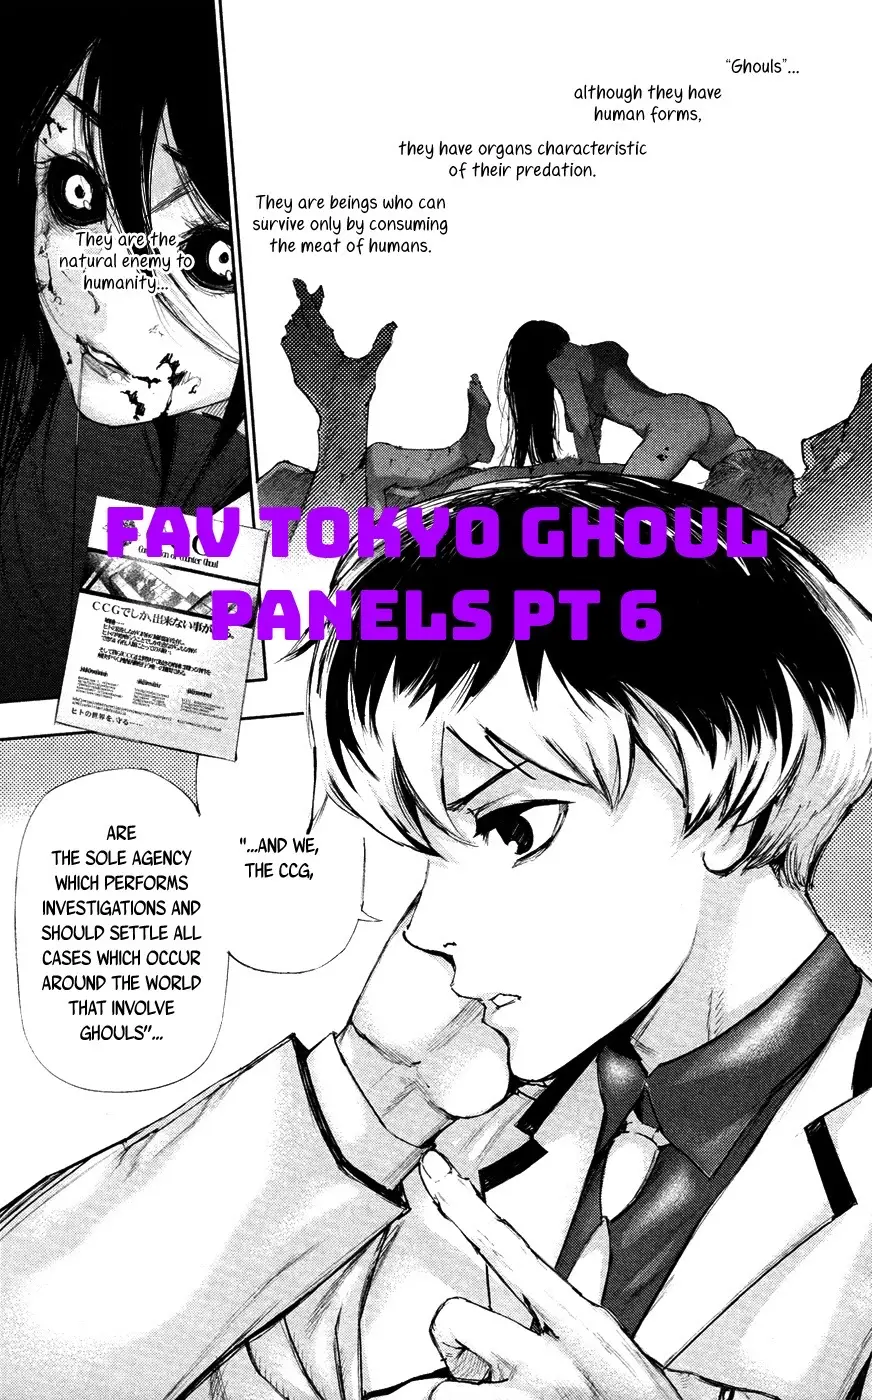 Technically its re: but its still tokyo ghoul so im jot restarting the number count #manga #anime #animanga #mangasuggestions #aniwmsuggestions #tokyoghoul #kenkaneki #fypage 